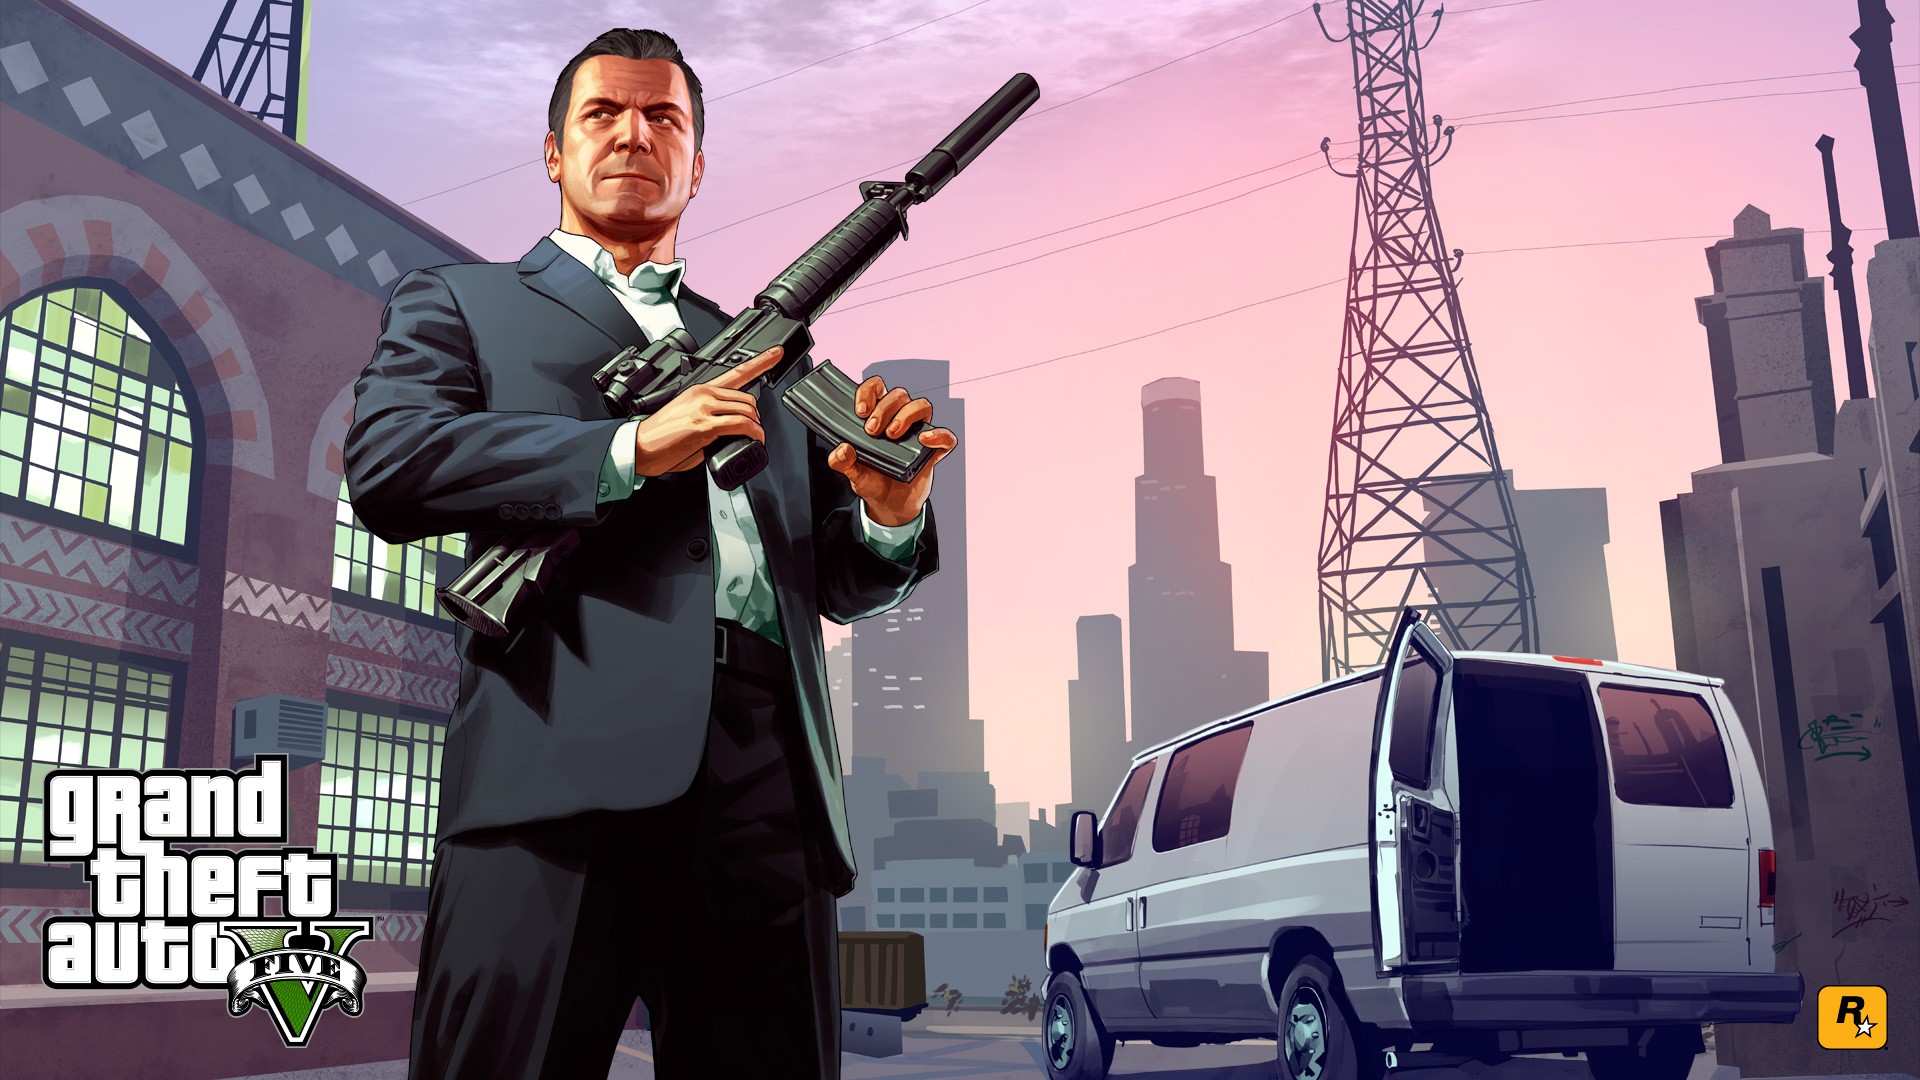 Grand Theft Auto V, Rockstar Games, Video Game Characters Wallpapers HD